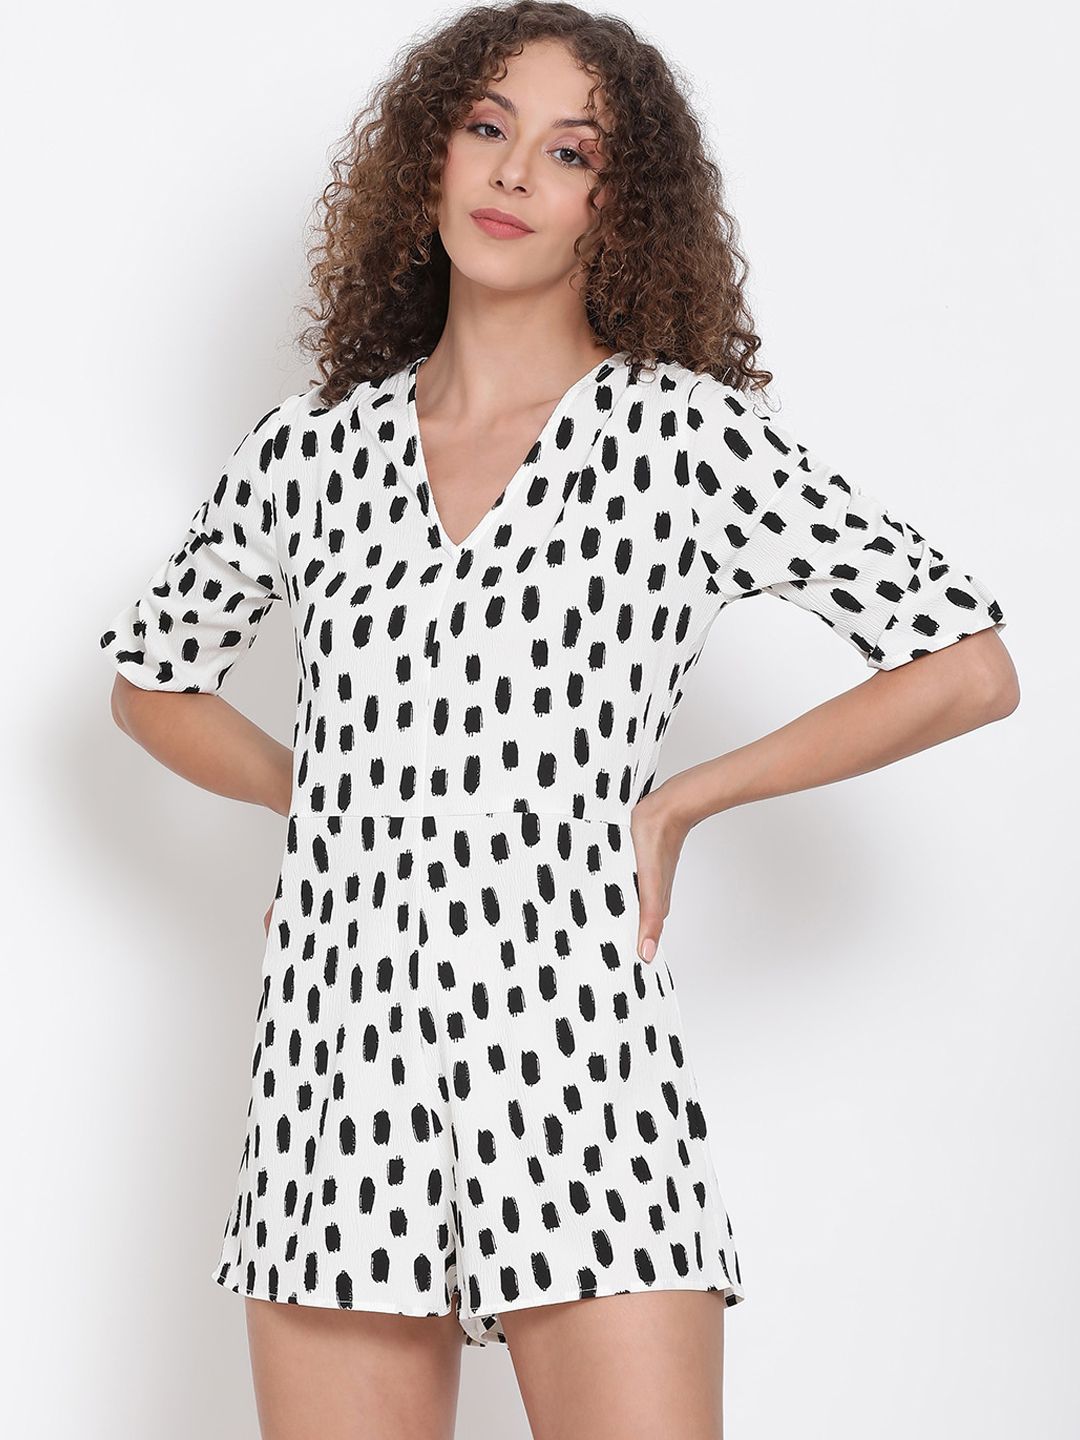 Oxolloxo Women White & Black Printed Playsuit Price in India